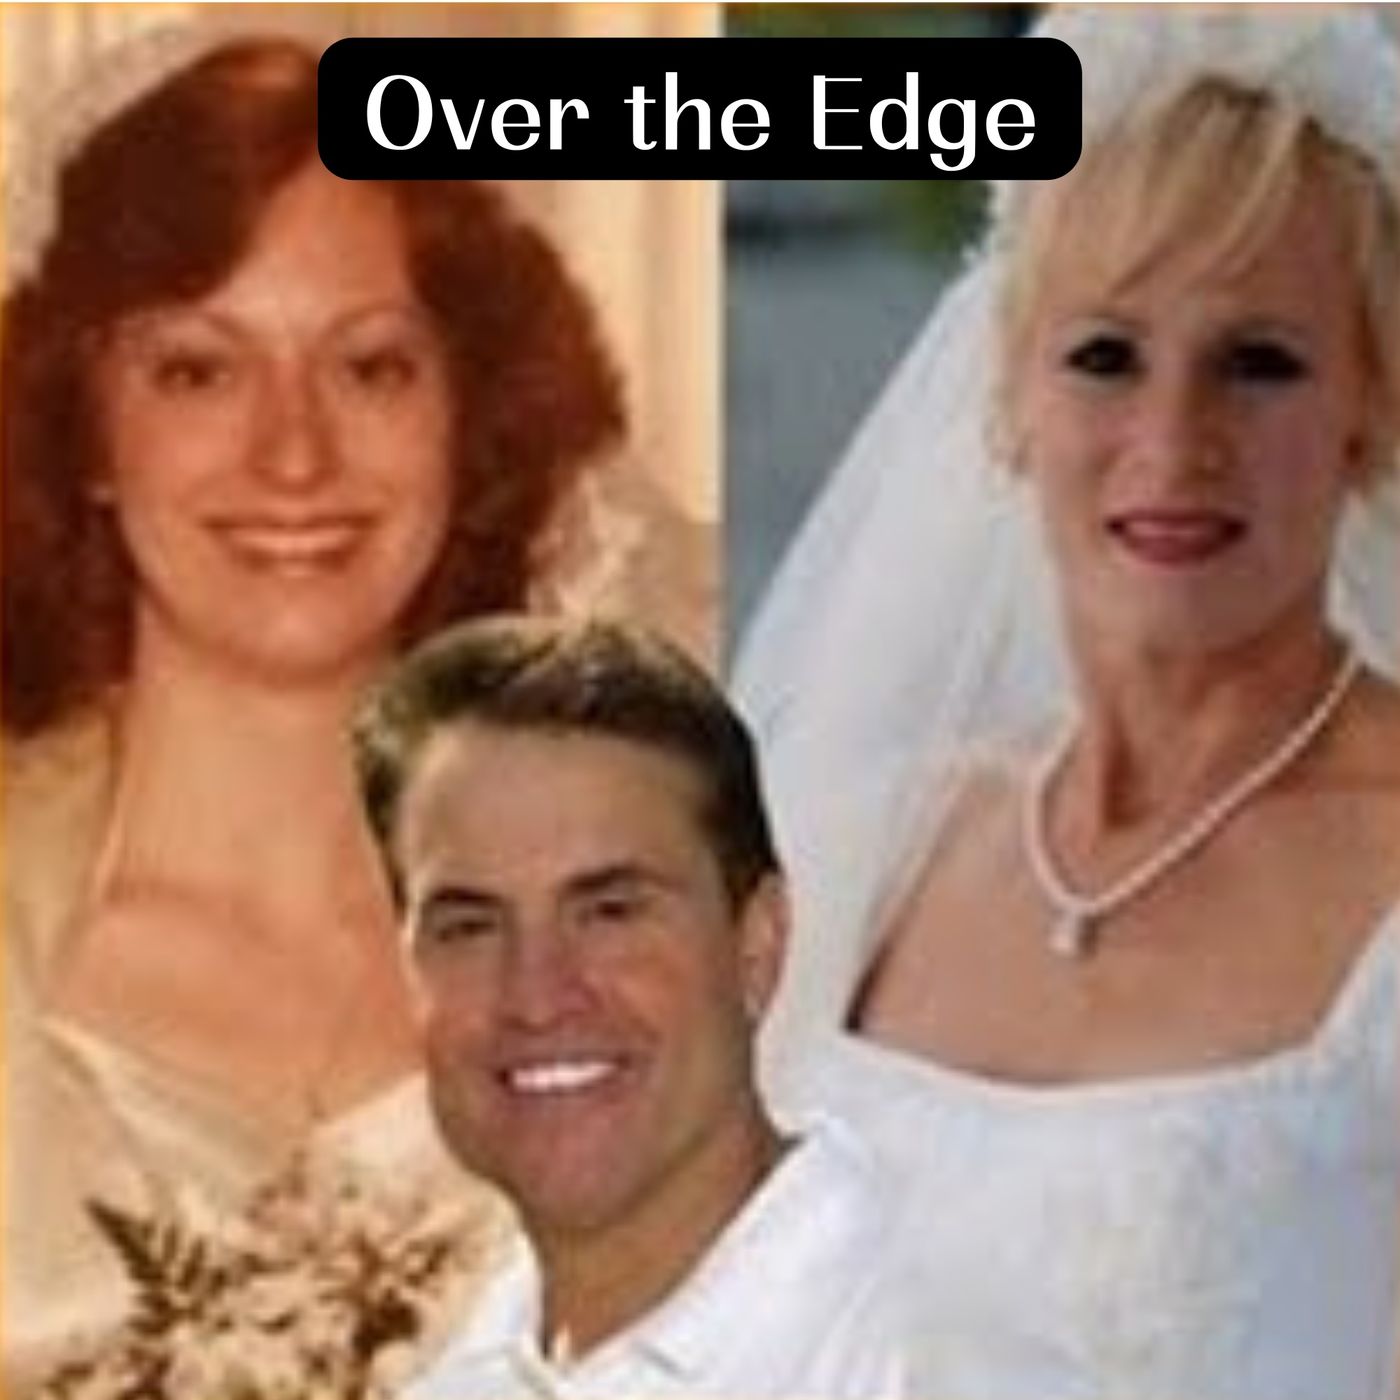 Over the Edge: The Murders of Lynn & Toni Henthorn